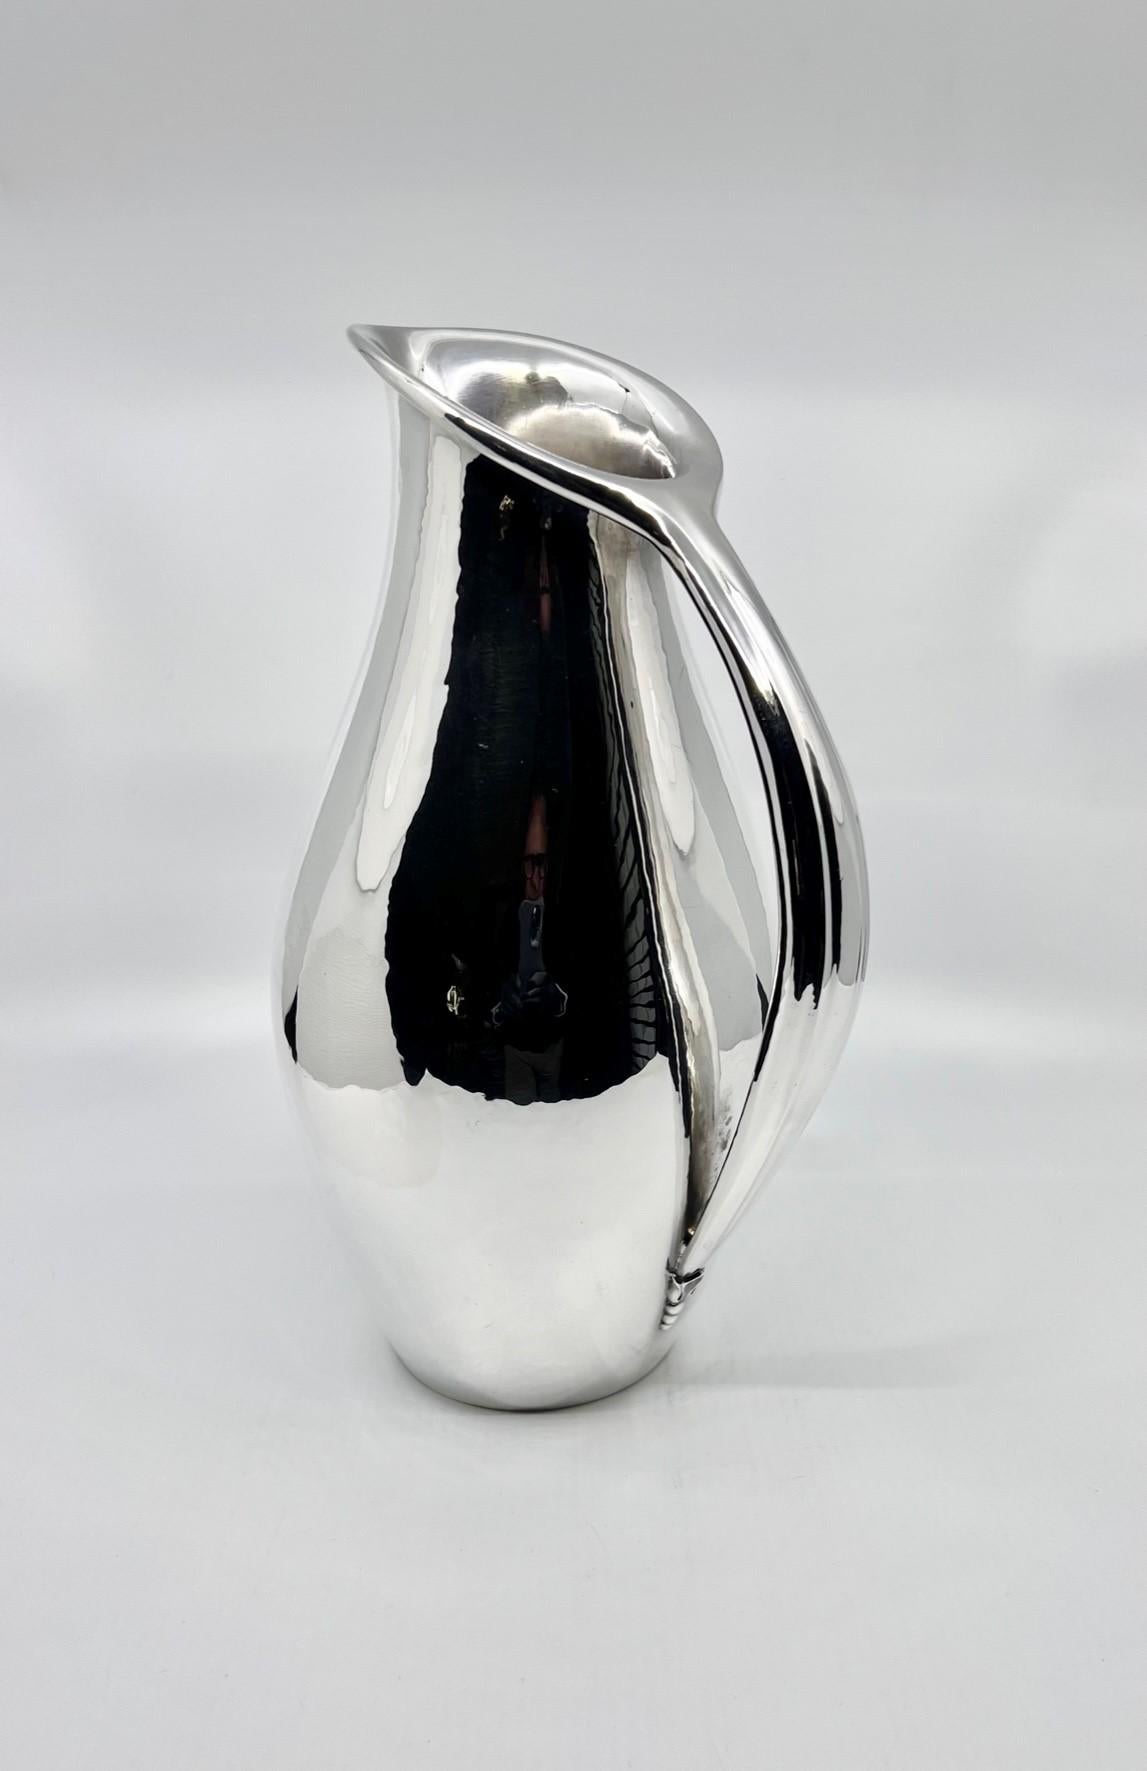 Forged Georg Jensen Extra Large Johan Rohde Pitcher 432C For Sale